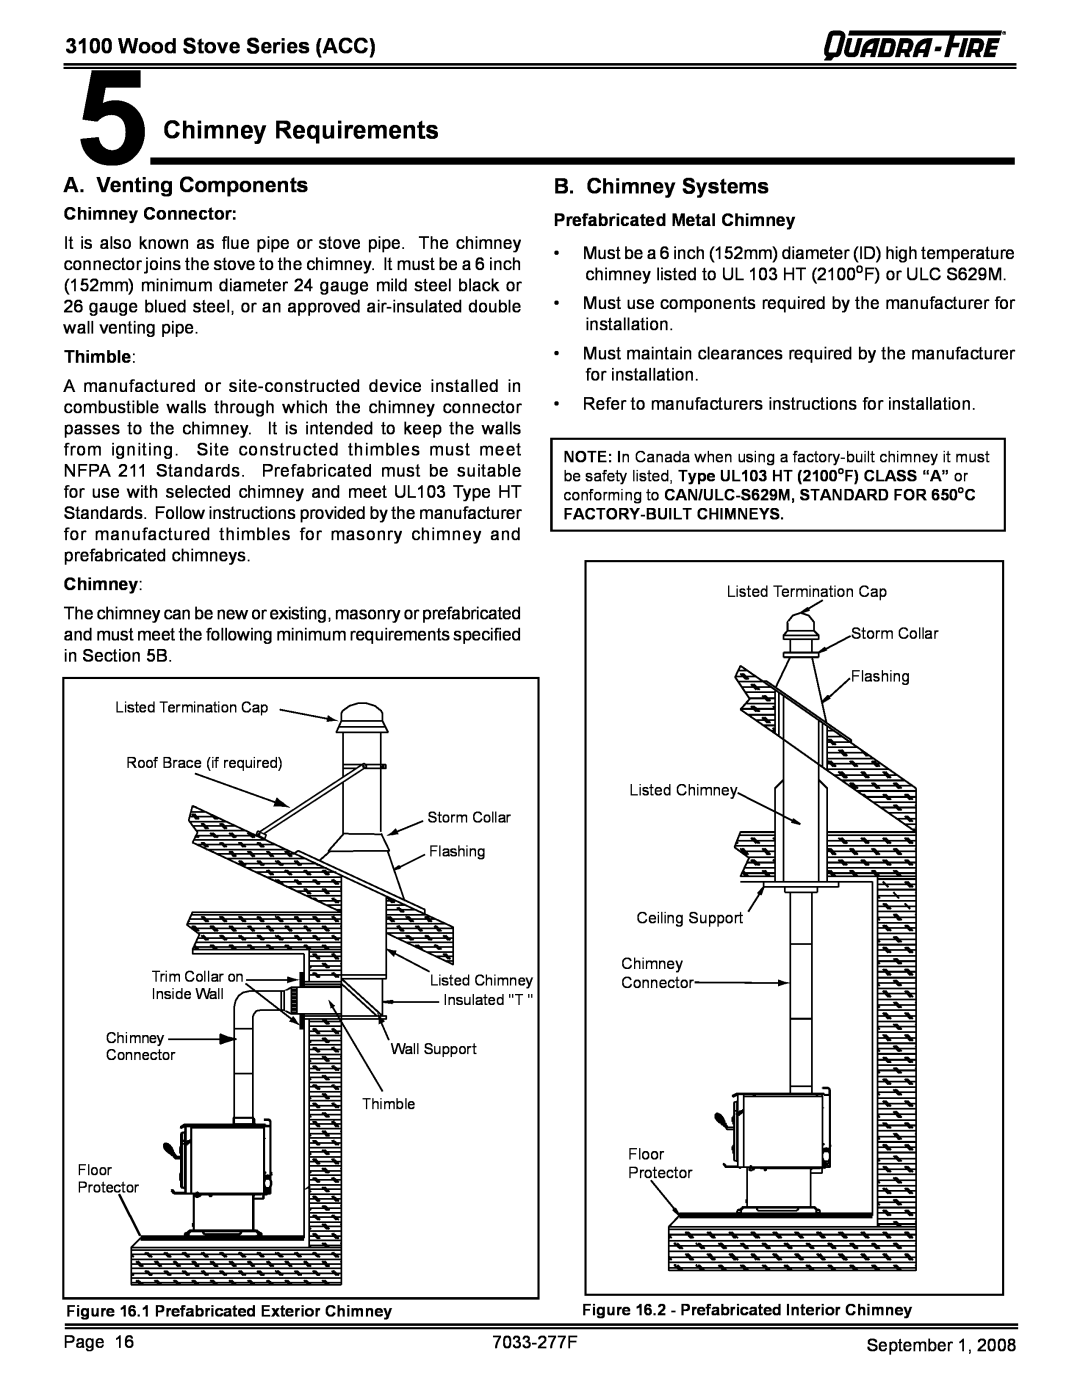 Hearth and Home Technologies 31ST-ACC Chimney Requirements, Venting Components, B. Chimney Systems, Wood Stove Series ACC 